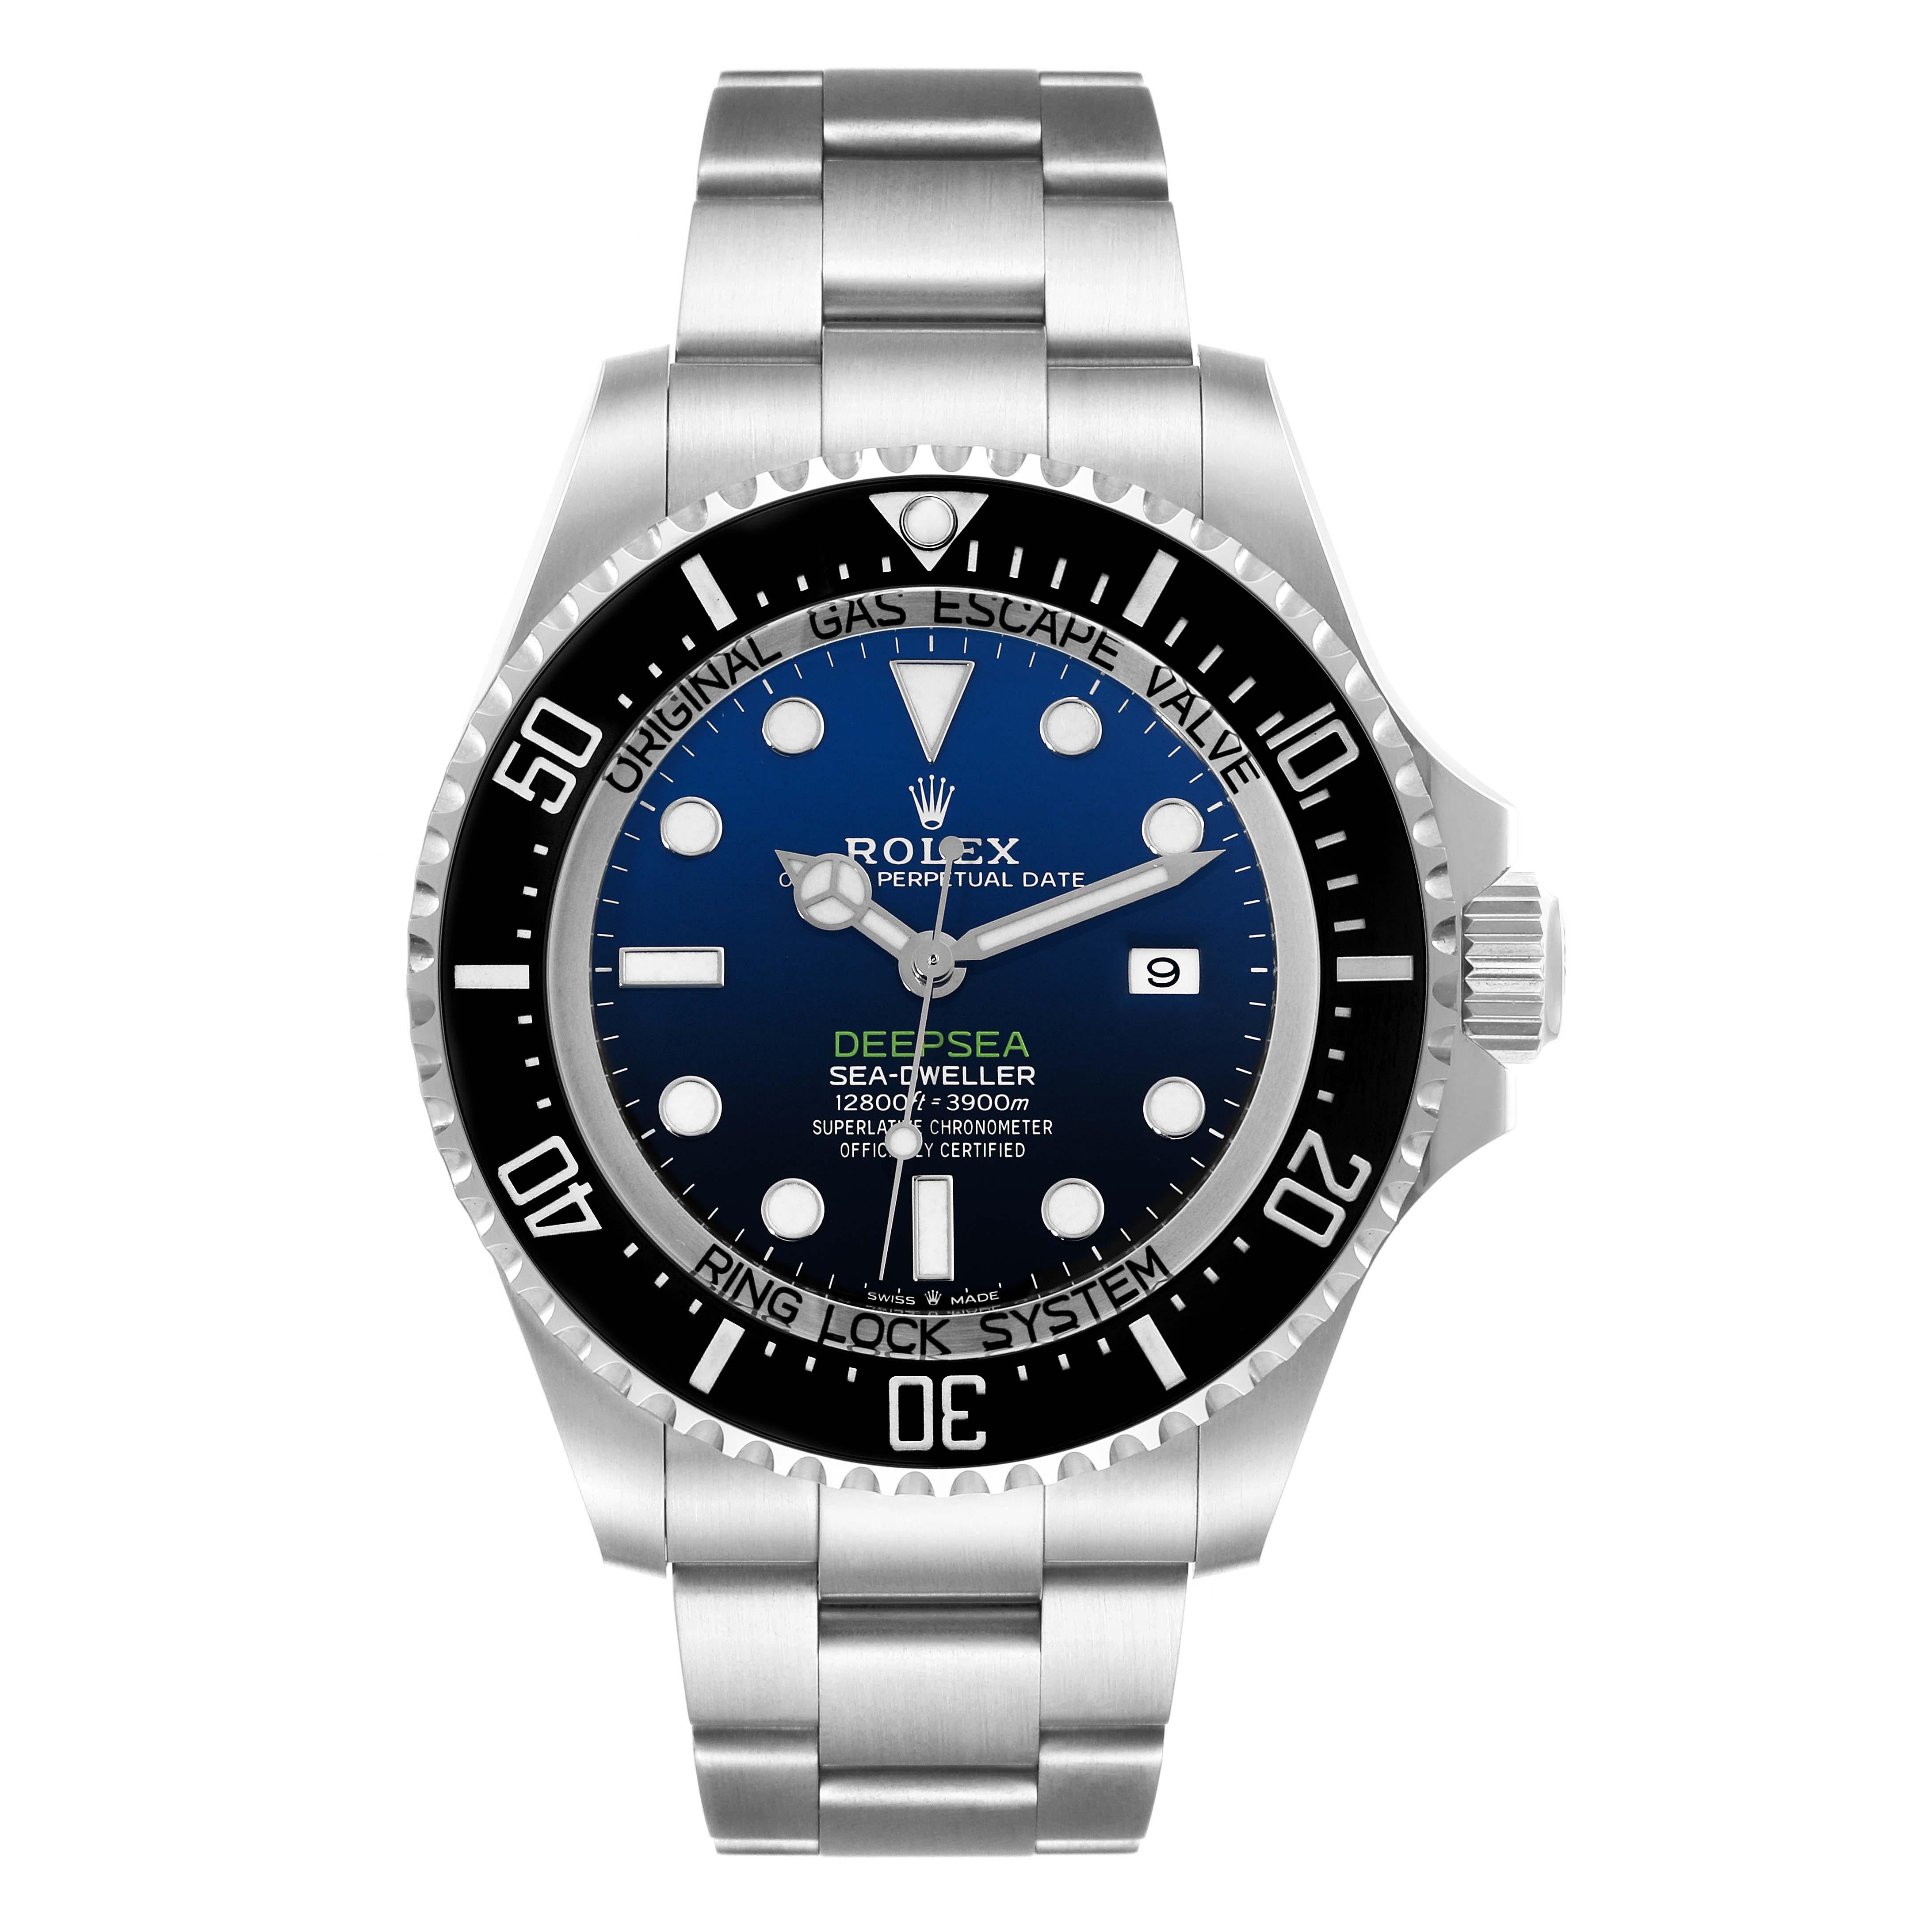 Rolex Seadweller Deepsea 44 Cameron D-Blue Dial Mens Watch 126660 Box Card. Officially certified chronometer automatic self-winding movement. Stainless steel oyster case 44 mm in diameter. Rolex logo on the crown. Special time-lapse unidirectional